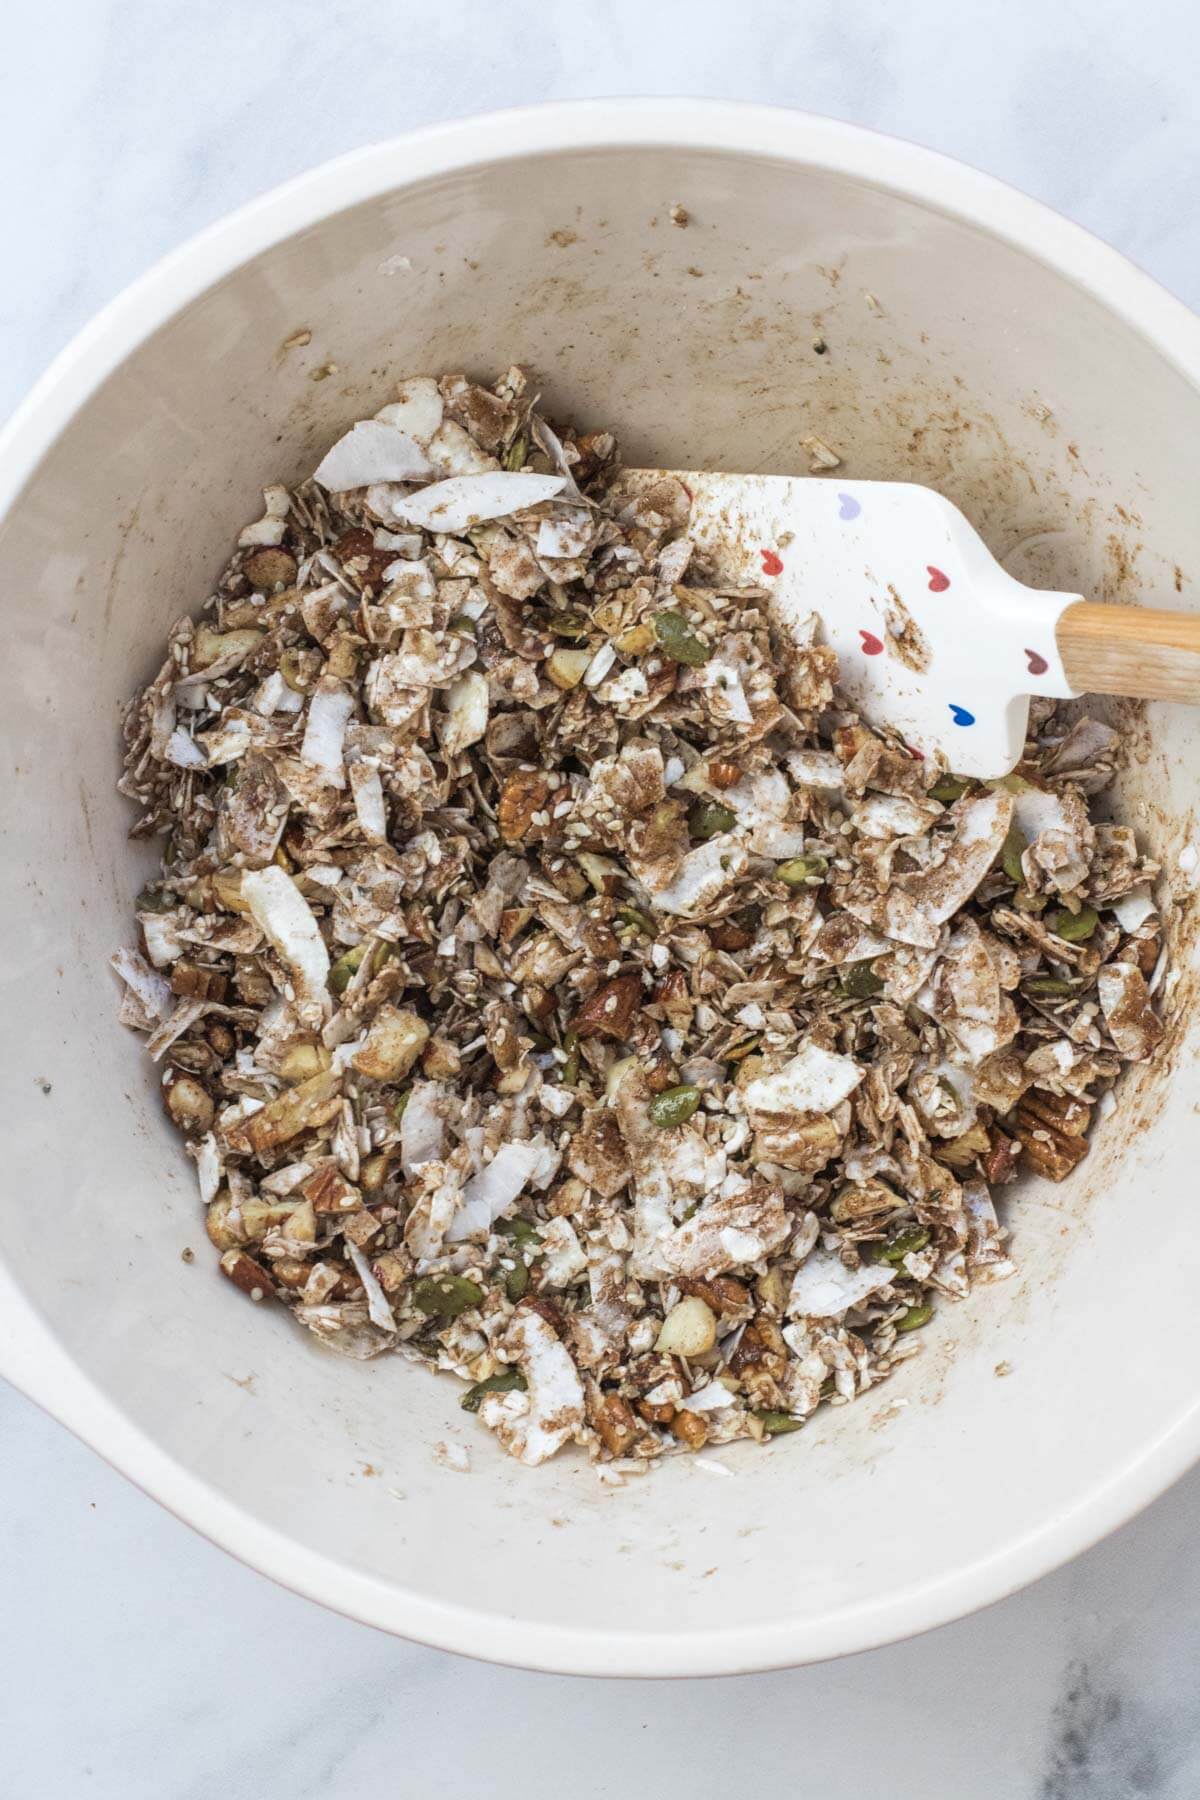 Granola ingredients all combined in a bowl.